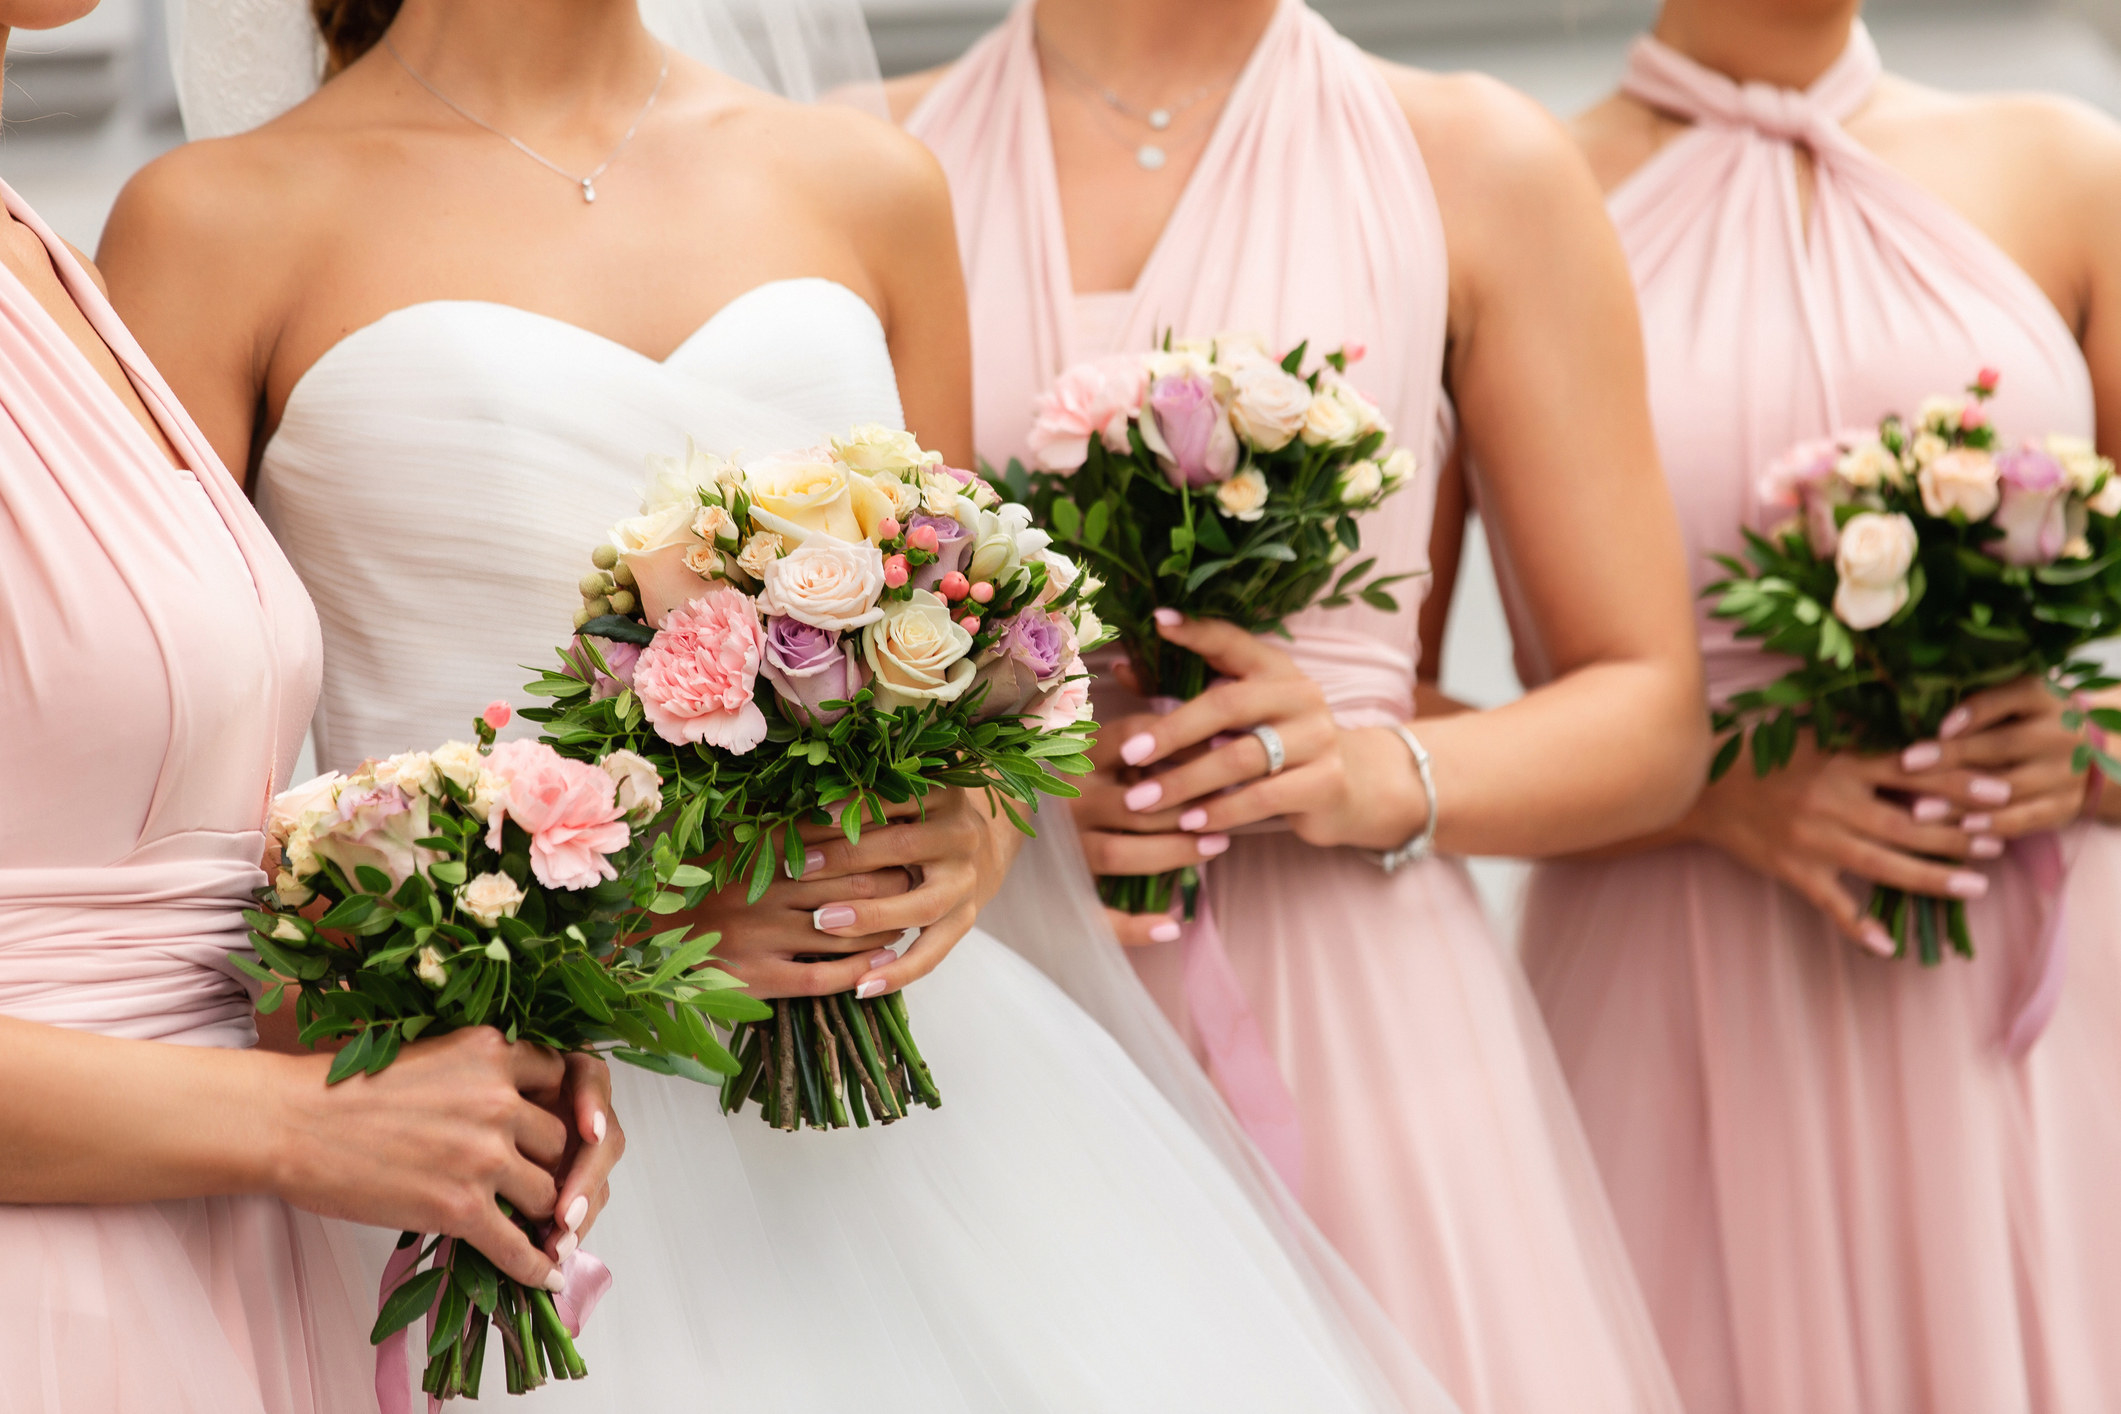 A bride with her bridemaids